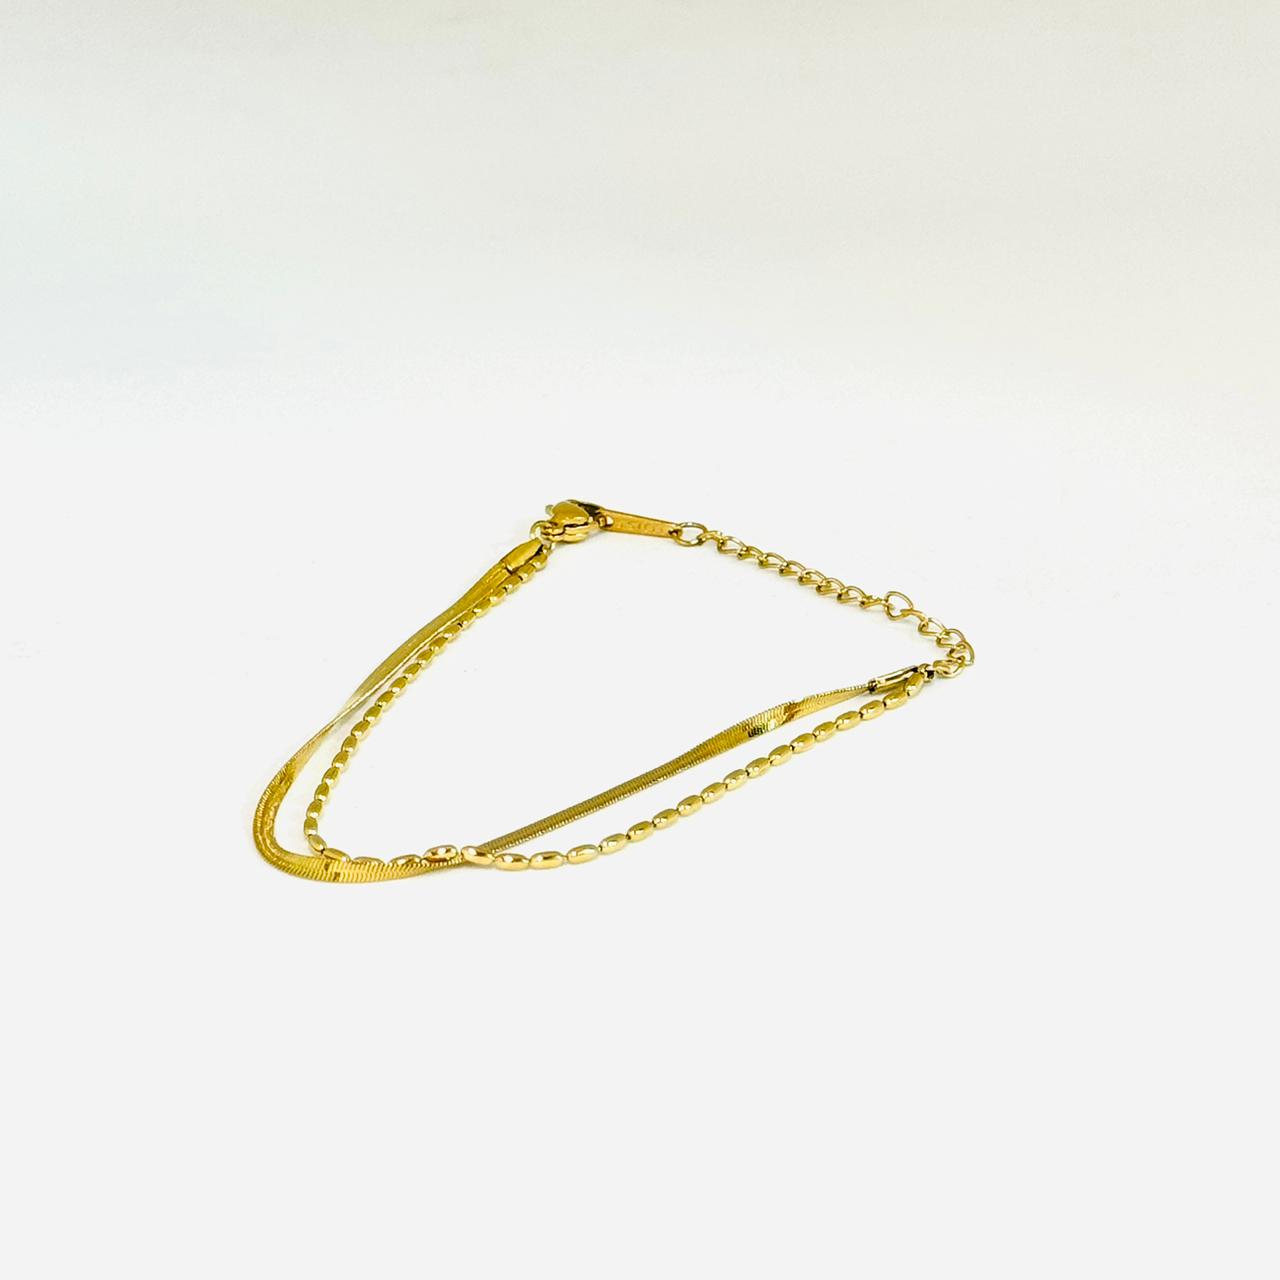 JAHA TOW LAYER ROSE GOLD STYLE BRACELET